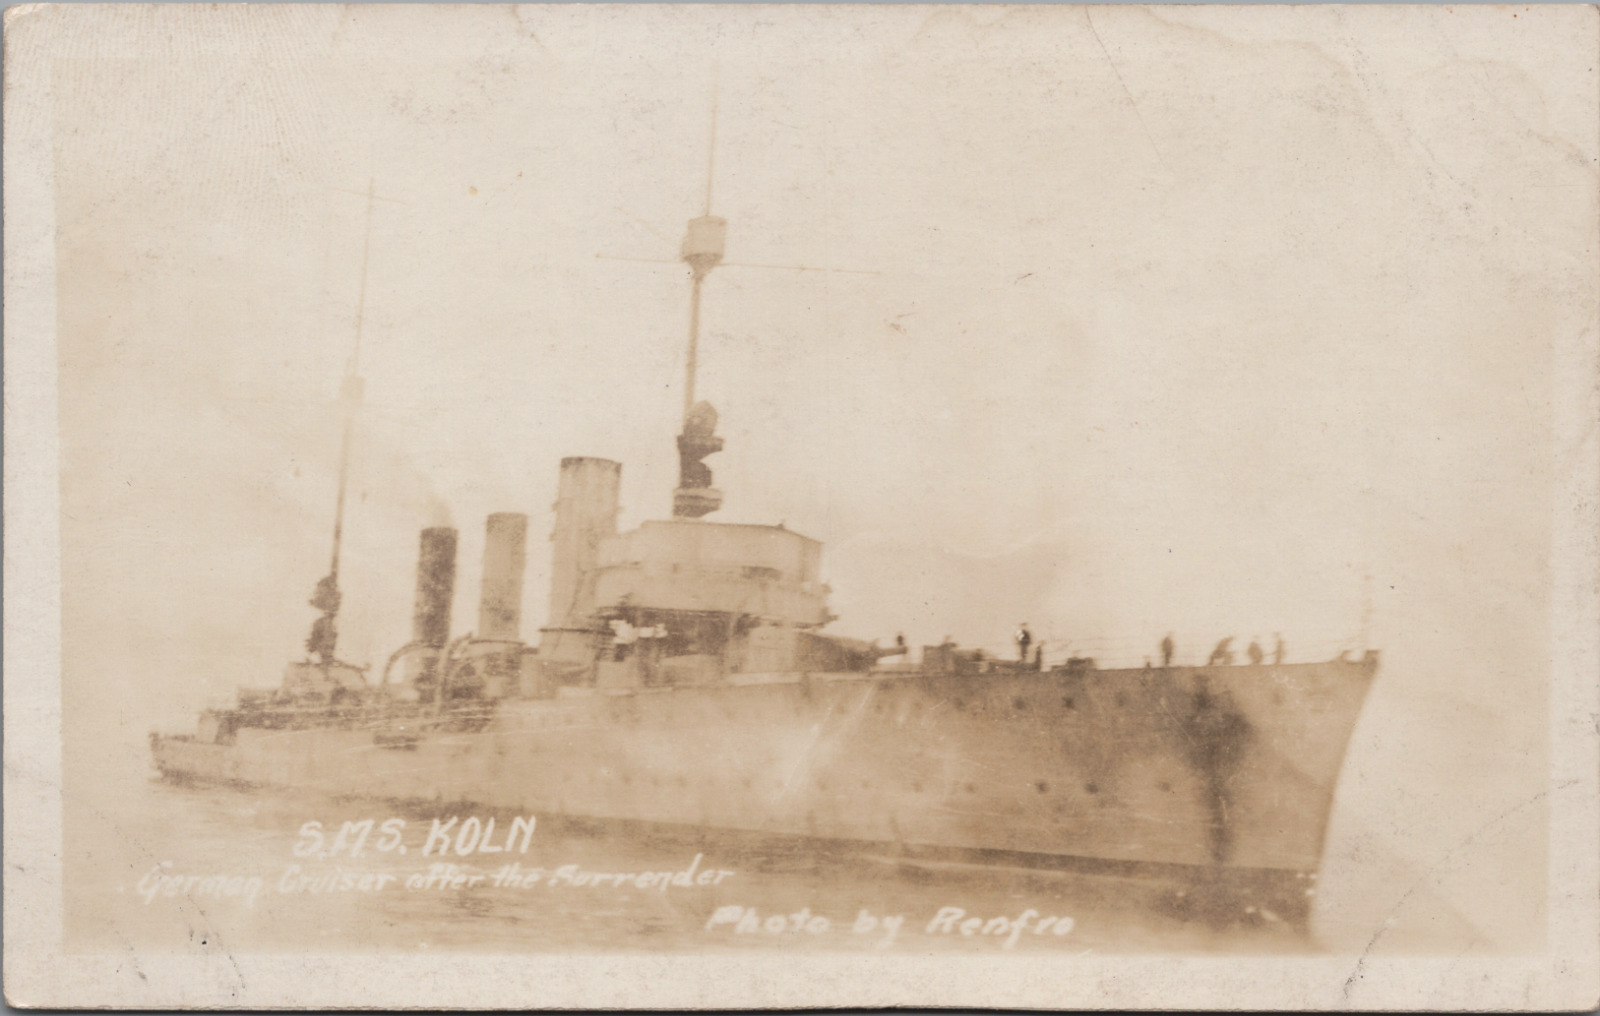 RPPC SMS Koln WWI German Cruiser After Surrender c1918 Imperial Navy Renfro